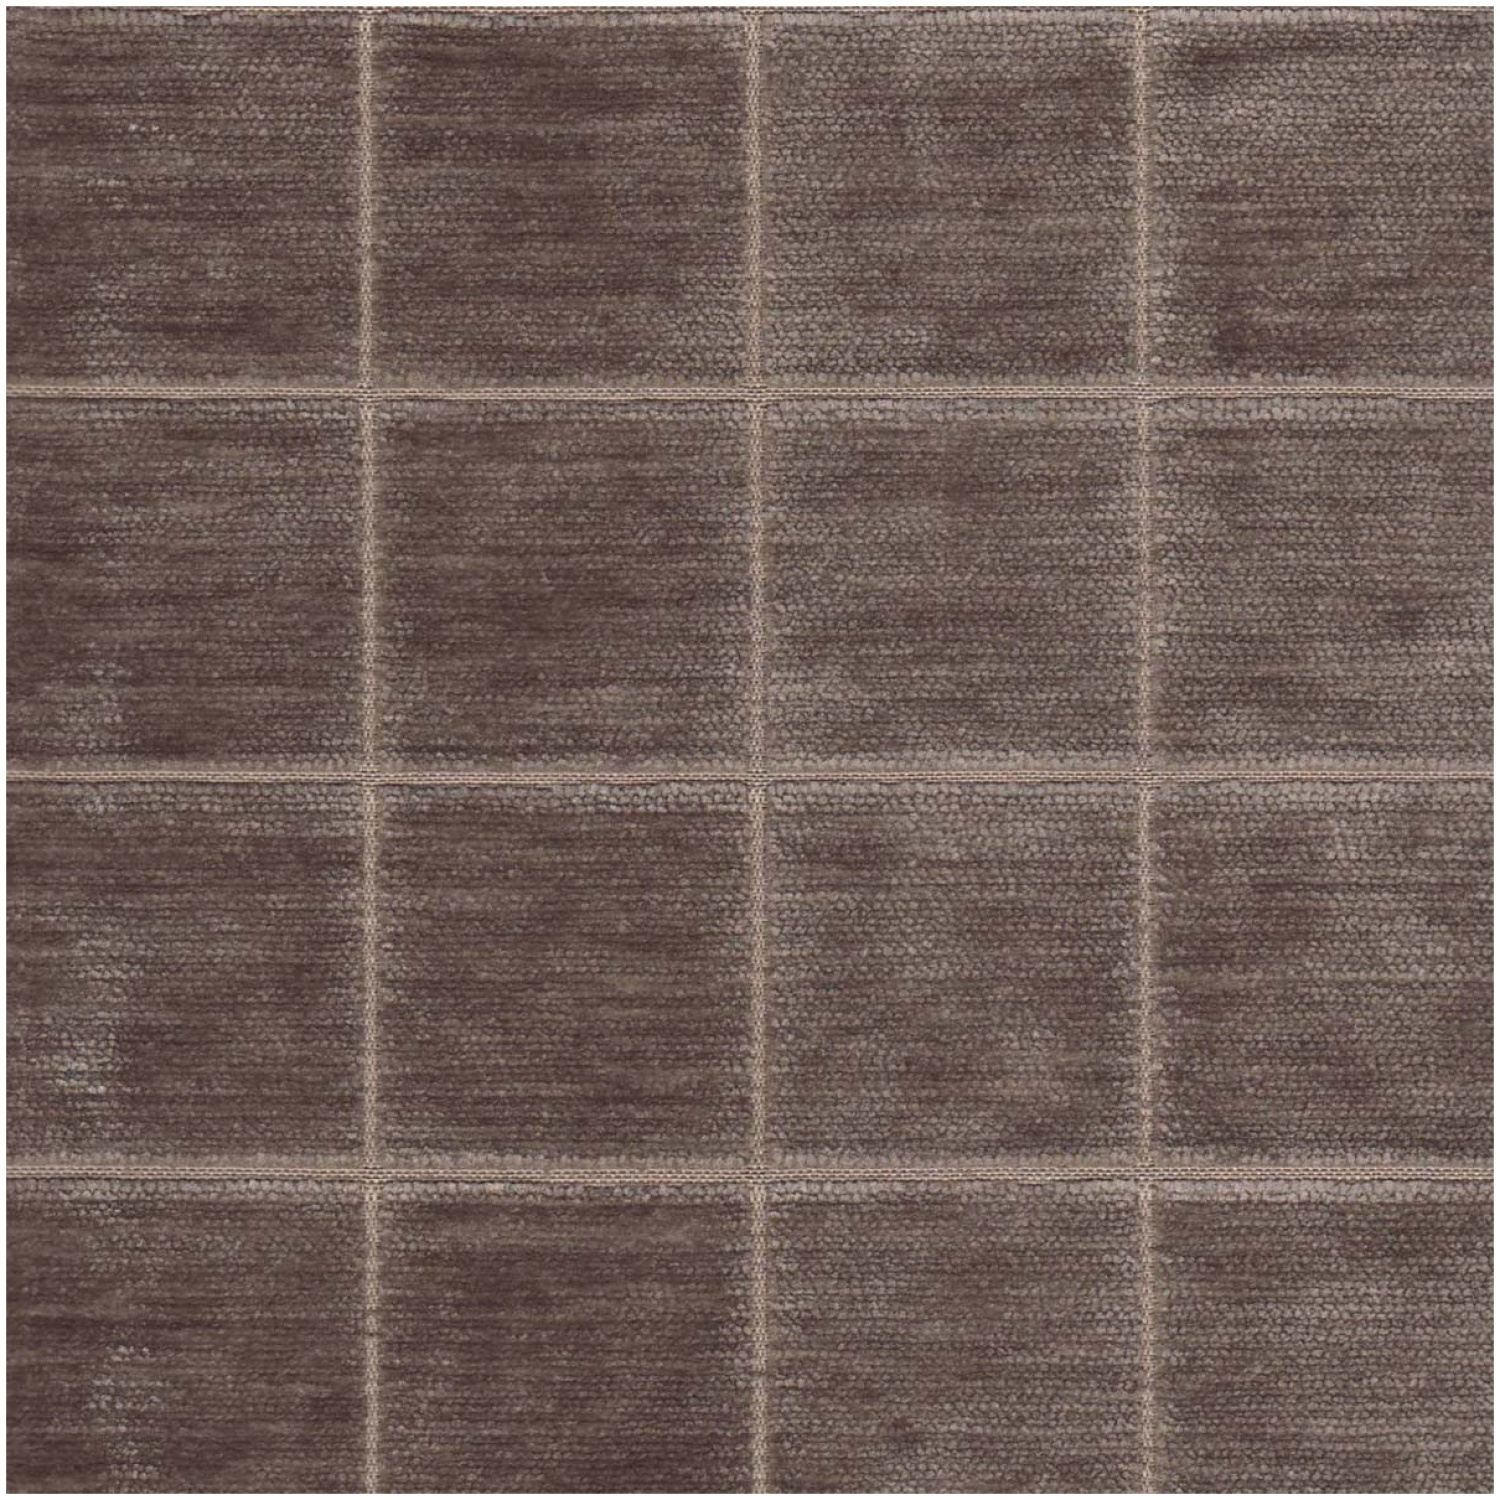 Vlock/Taupe - Upholstery Only Fabric Suitable For Upholstery And Pillows Only.   - Frisco